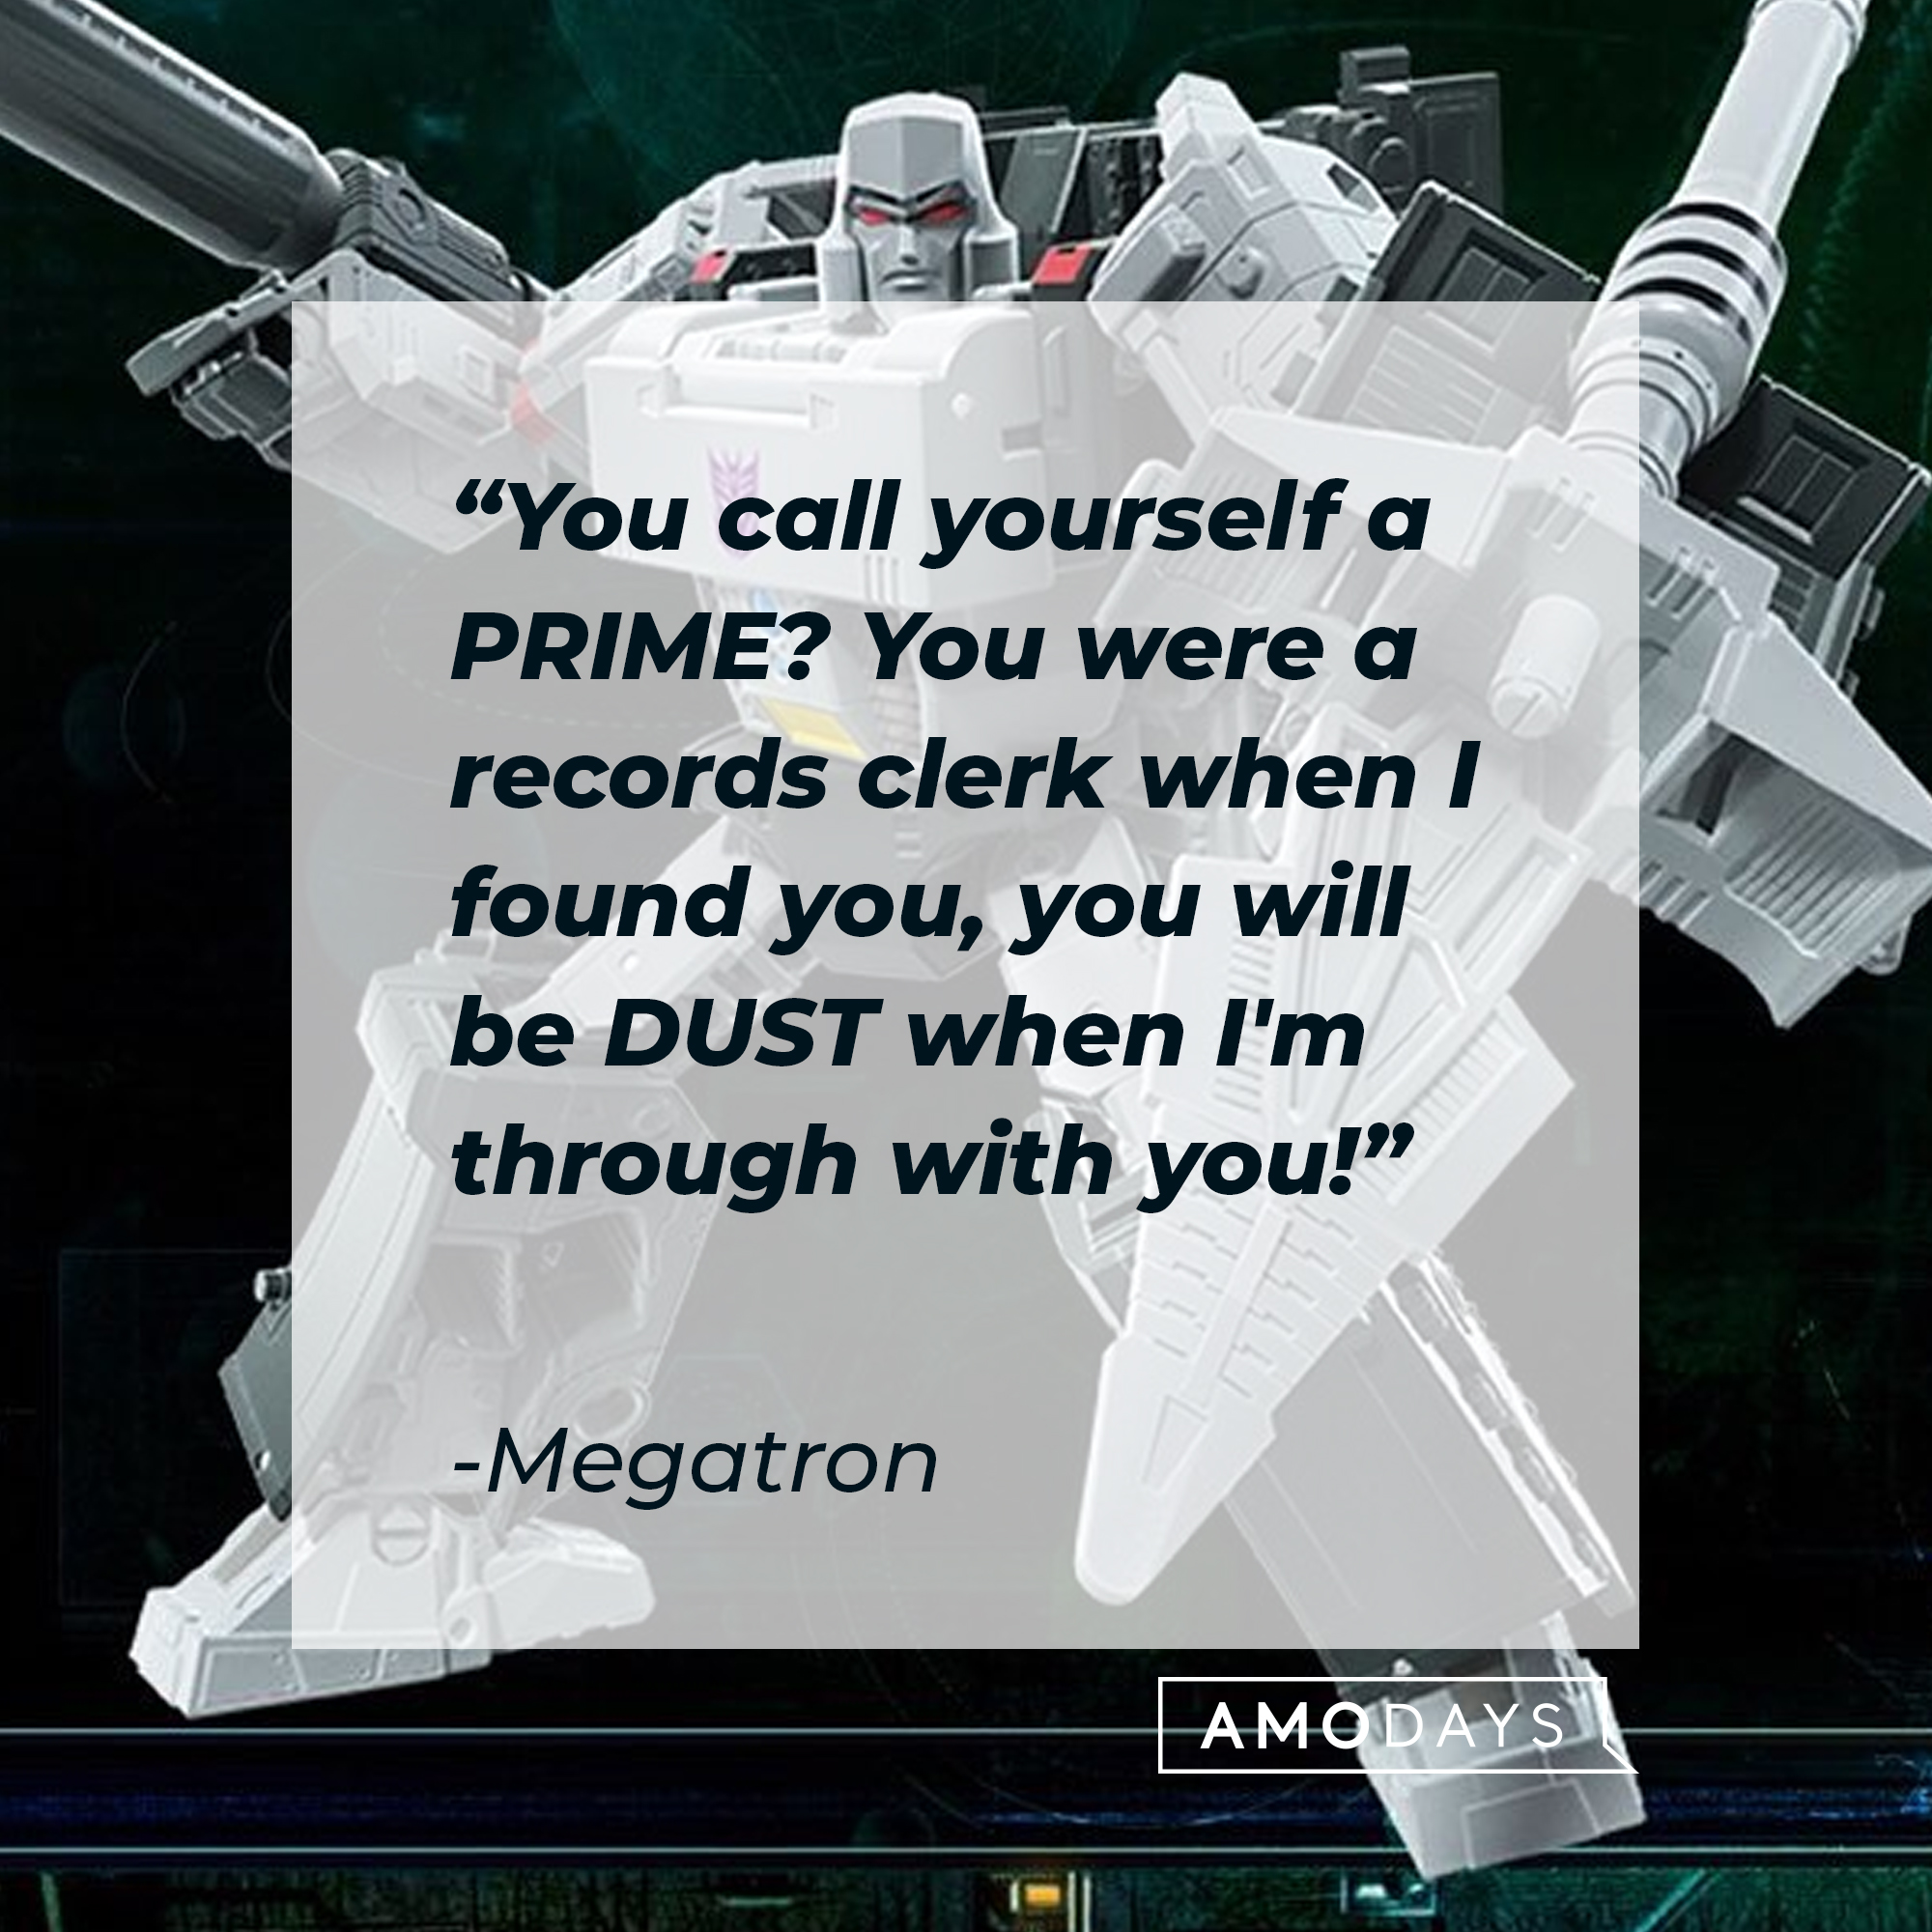 A photo of Megatron with his quote, "You call yourself a PRIME? You were a records clerk when I found you, you will be DUST when I'm through with you!" | Source: Facebook/transformers